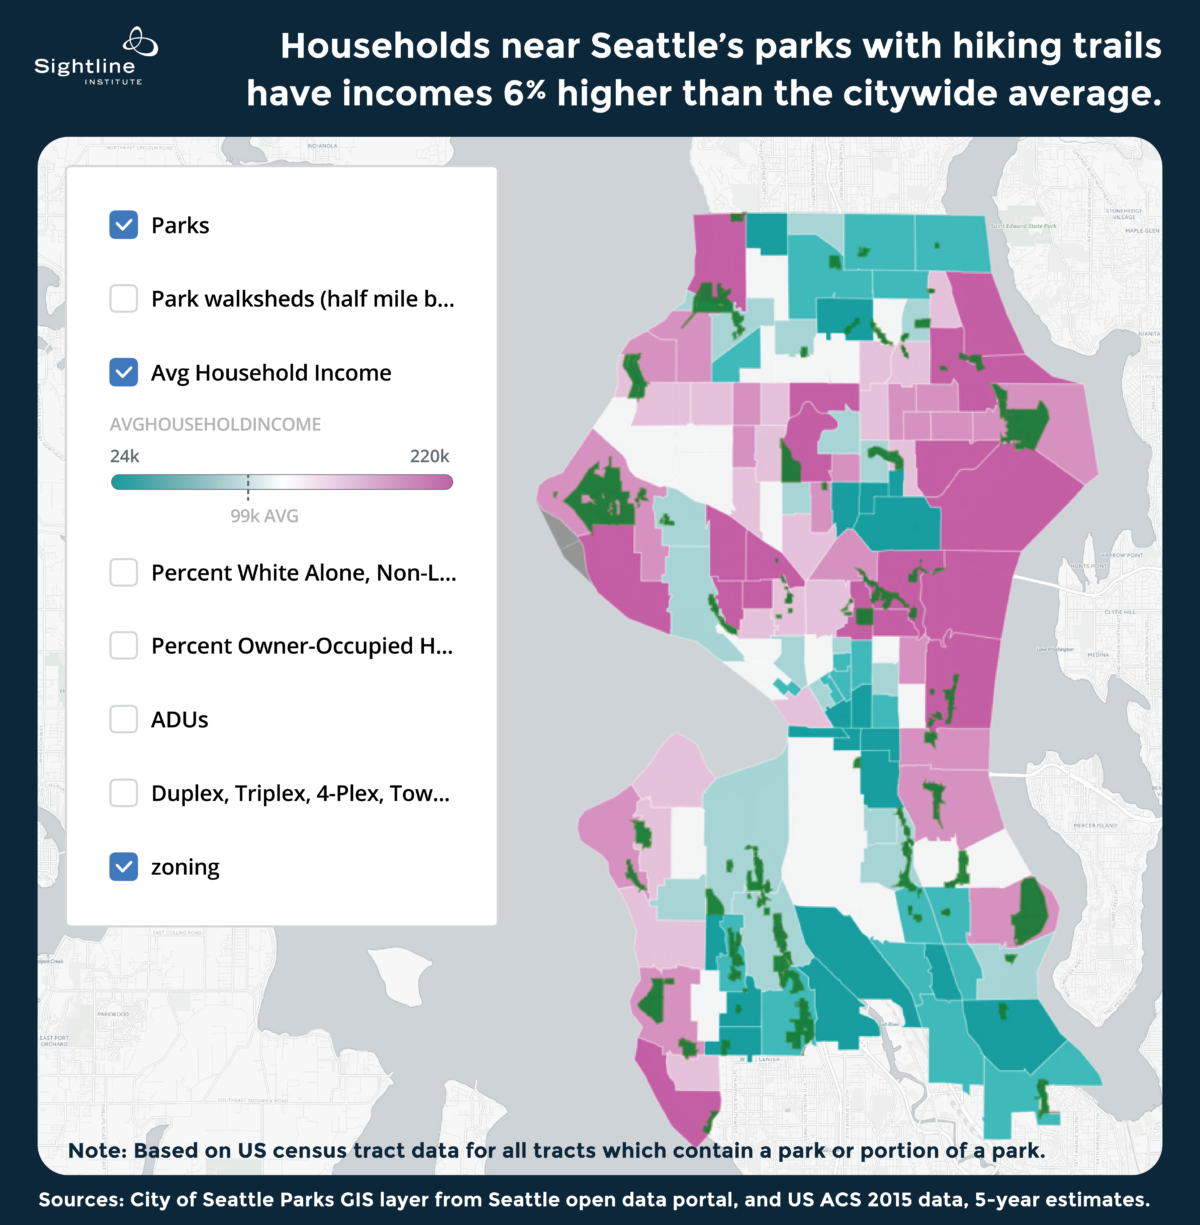 Seattle’s parks with hiking trails, shown in green, are more accessible to high-income households. Census tracts are color-coded according to average household income, with households in the darkest pink tracts averaging over $200,000 annual income and households in the turquoise tracts averaging less than $50,000 per year. Households in census tracts surrounding parks with hiking trails average 16 percent higher income than the typical Seattle household. Original Sightline Institute graphic, available under our free use policy.